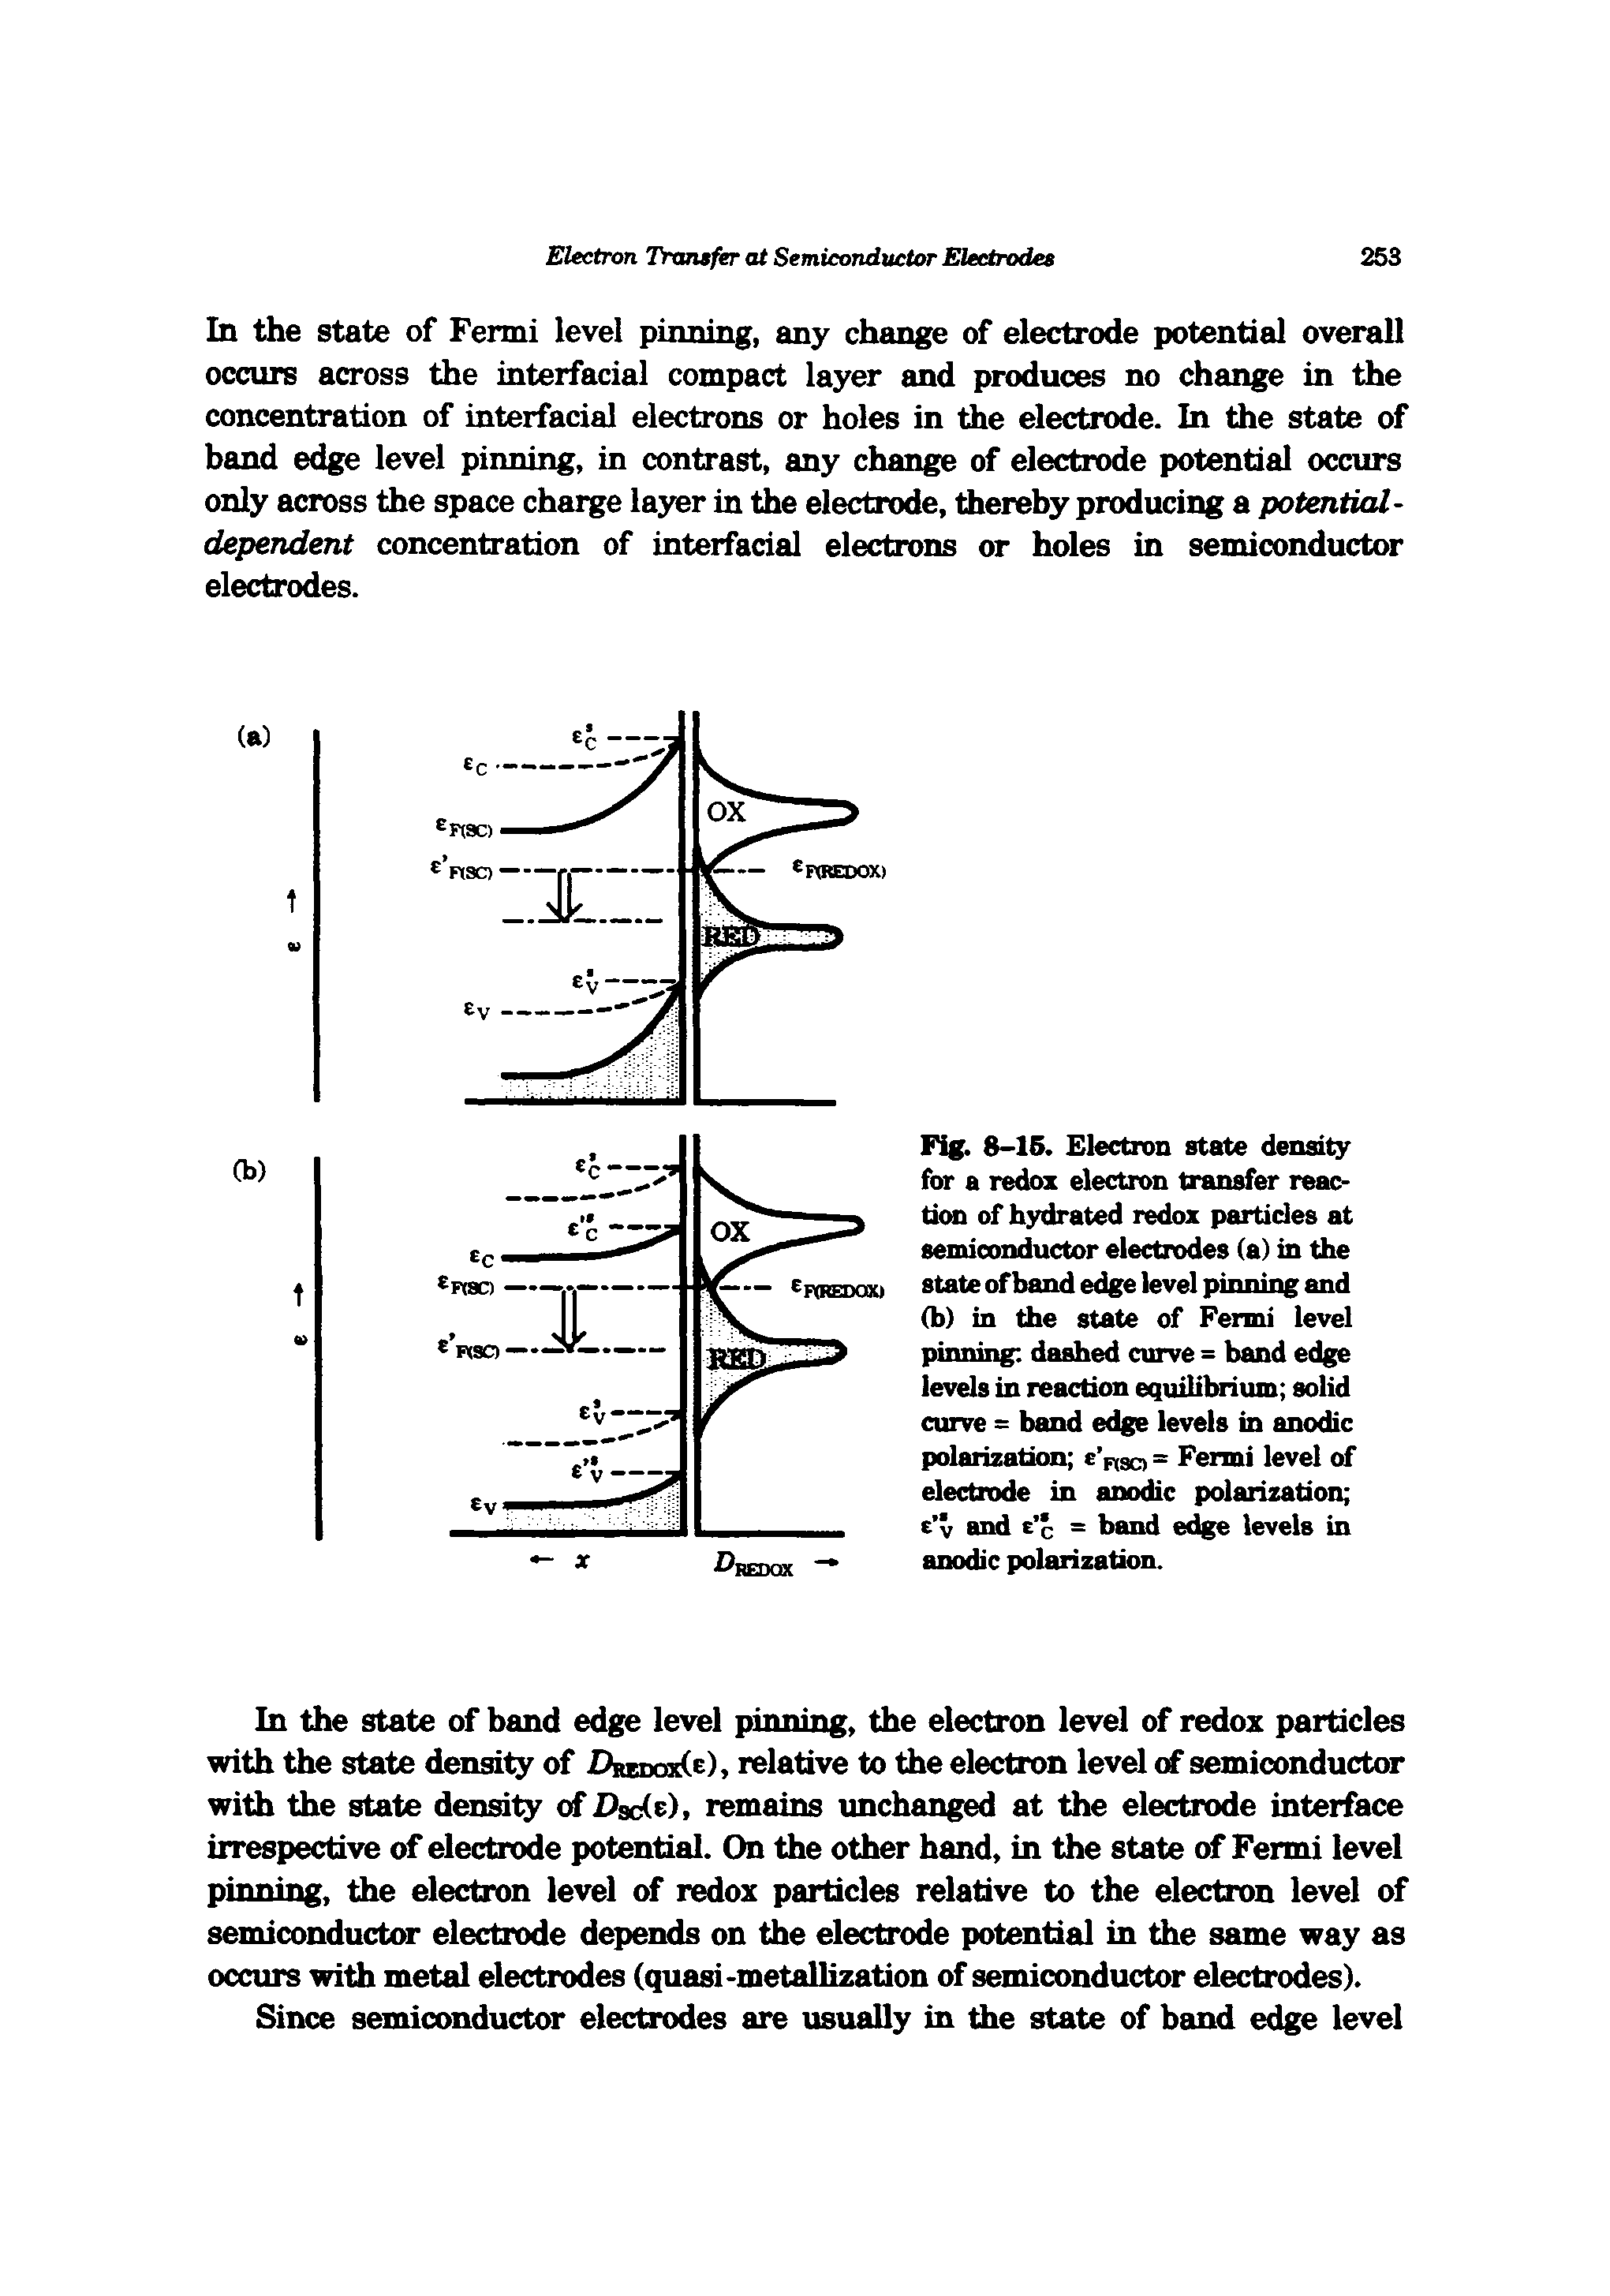 Fig. 8-16. Electron state density for a redox electron transfer reaction of h3rdrated redox particles at semiconductor electrodes (a) in the state of band edge level pinning and (b) in the state of Fermi level pinning dashed curve = band edge levels in reaction equilibrium solid curve = band edge levels in anodic polarization e p,sq = Fermi level of electrode in anodic polarization e v and c c = band edge levels in anodic polarization.